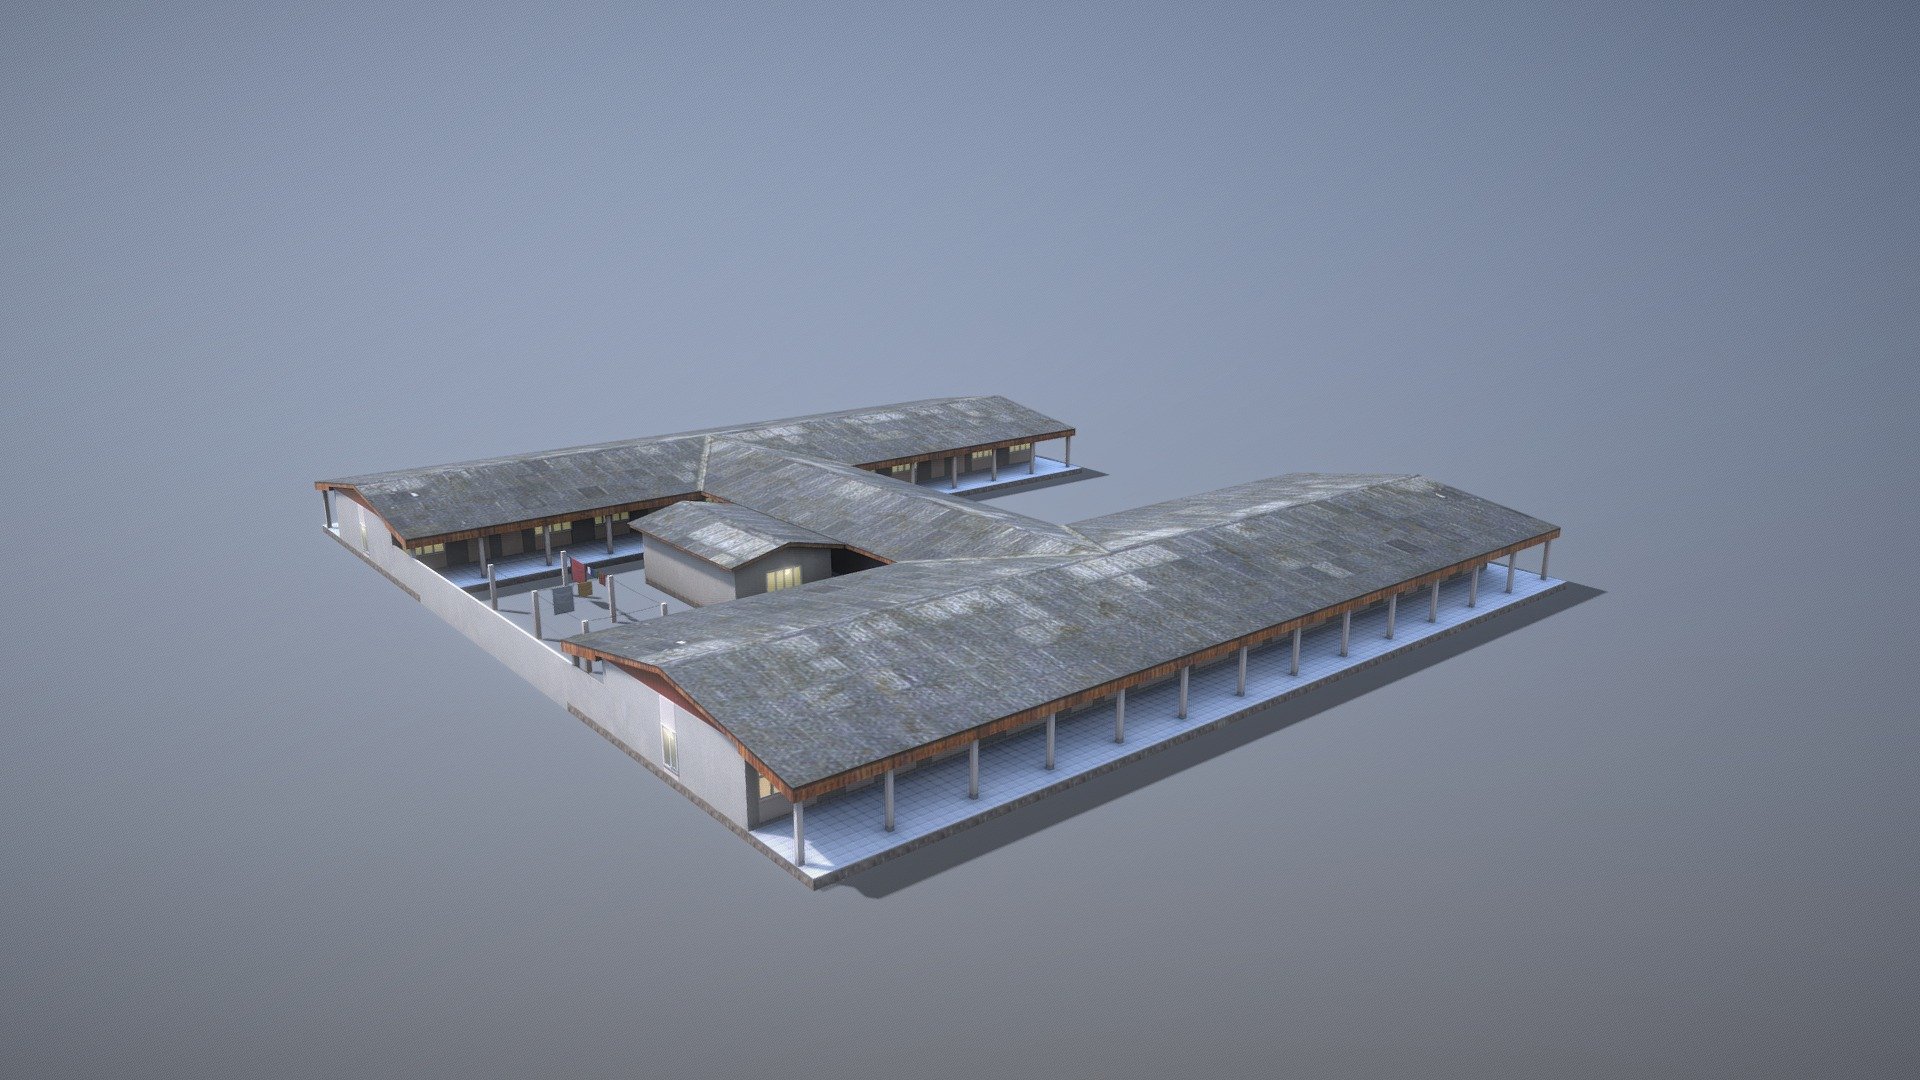 MilitaryBase_PortoVelho_Barracks_01


LOD0 - (triangles 1164) / (points 934)
LOD1 - (triangles 184) / (points 103)

Low-poly 3D model Airport Barracks with LODs




Textures for PBR shader (Albedo, AmbietOcclusion, Gloss, Specular, NormalMap, Emission(night)) they may be used with Unity3D, Unreal Engine. 

All pictures (previews) REALTIME rendering

Textures for NIGHT


Сontains 2 LODs




Textures:




MilitaryBase_PortoVelho_Barracks_01_Albedo.png        - 1024x1024

MilitaryBase_PortoVelho_Barracks_01_AmbietOcclusion.png   - 1024x1024

MilitaryBase_PortoVelho_Barracks_01_Gloss.png         - 1024x1024

MilitaryBase_PortoVelho_Barracks_01_Specular.png      - 1024x1024

MilitaryBase_PortoVelho_Barracks_01_NormalMap.png     - 1024x1024 

MilitaryBase_PortoVelho_Barracks_01_Emission.png      - 1024x1024



If you have questions about my models or need any kind of help, feel free to contact me and i'll do my best to help you 3d model